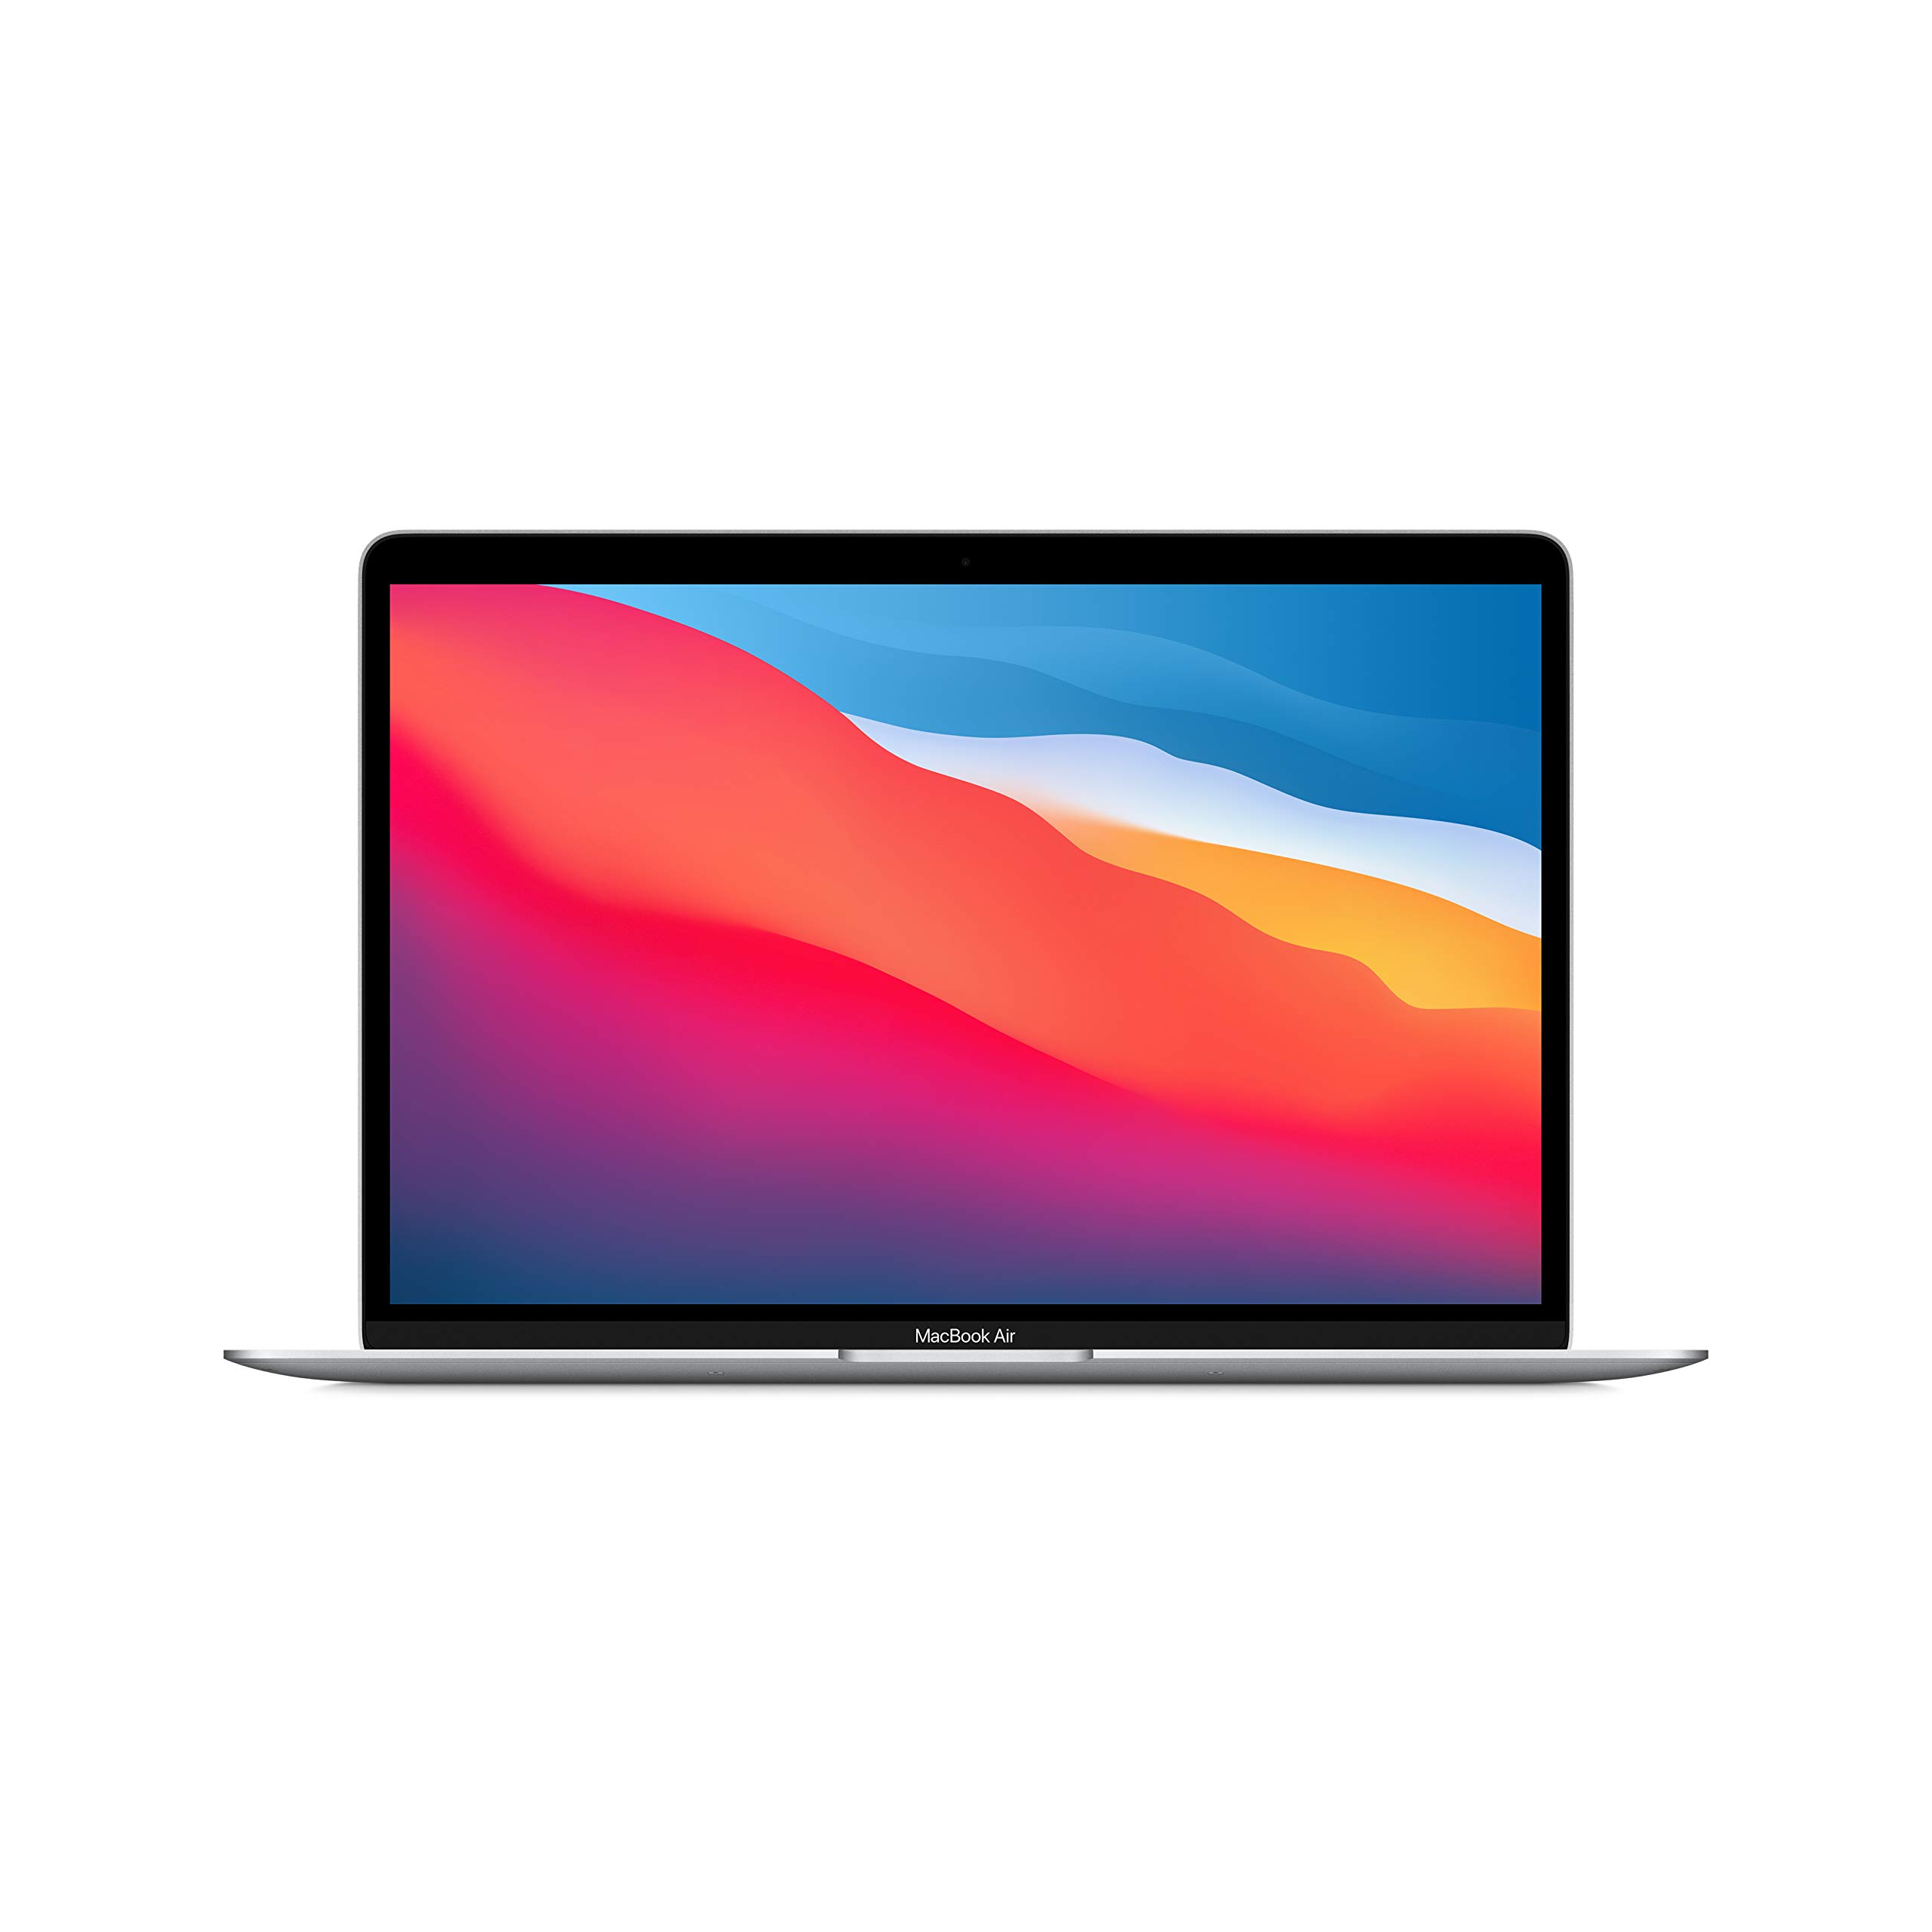 Apple 2020 MacBook Air Laptop M1 Chip, 13" Retina Display, 8GB RAM, 512GB SSD Storage, Backlit Keyboard, FaceTime HD Camera, Touch ID. Works with iPhone/iPad; Silver